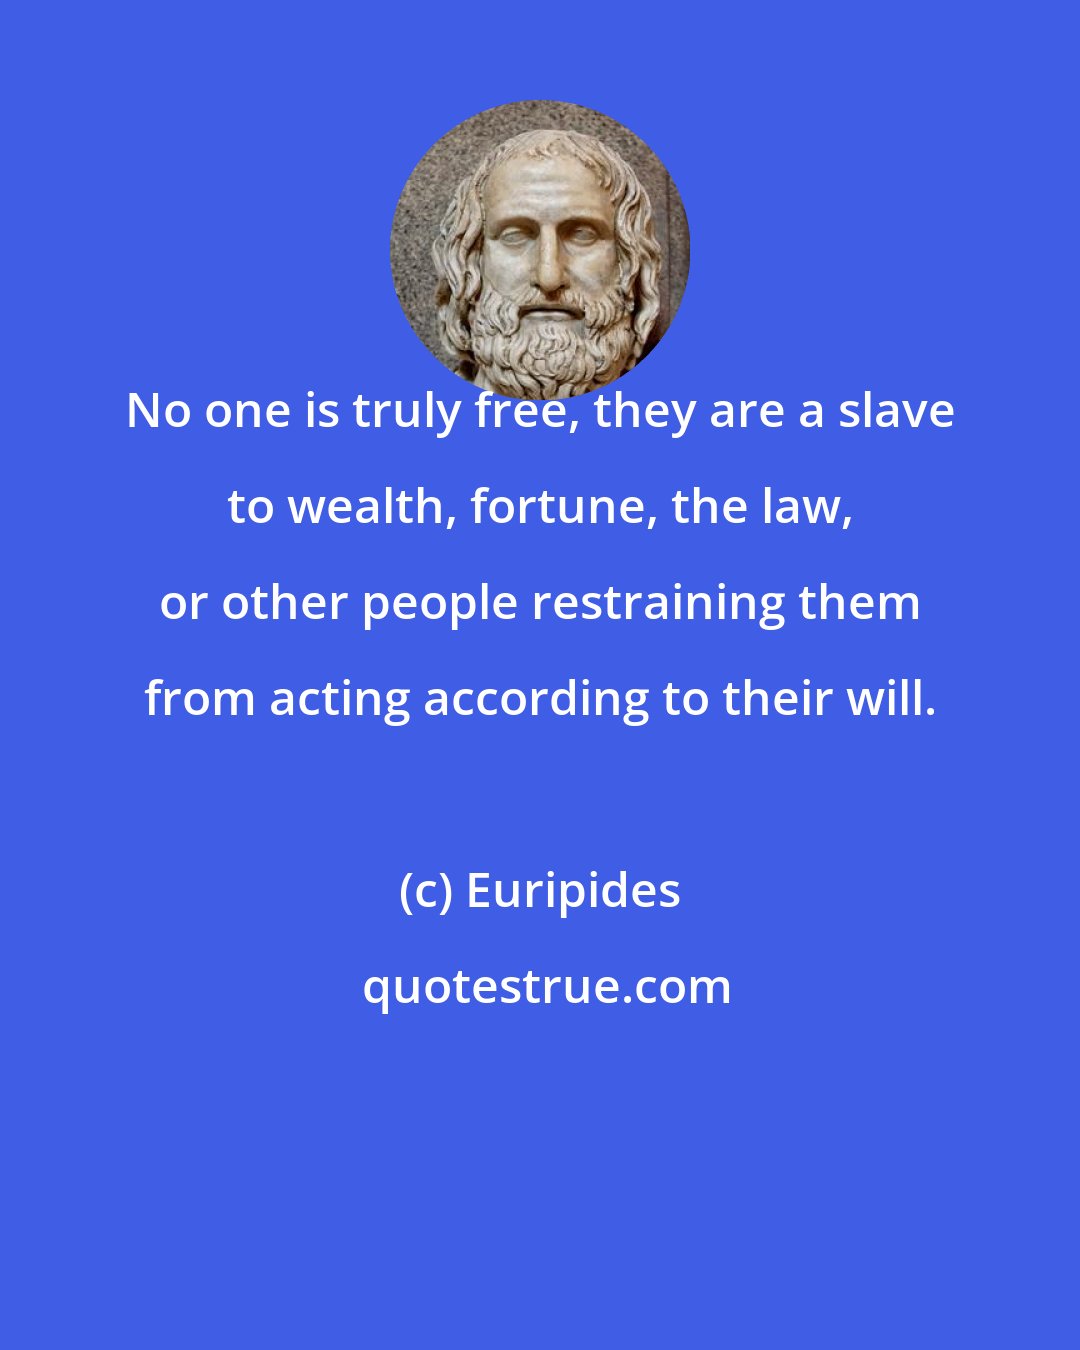 Euripides: No one is truly free, they are a slave to wealth, fortune, the law, or other people restraining them from acting according to their will.